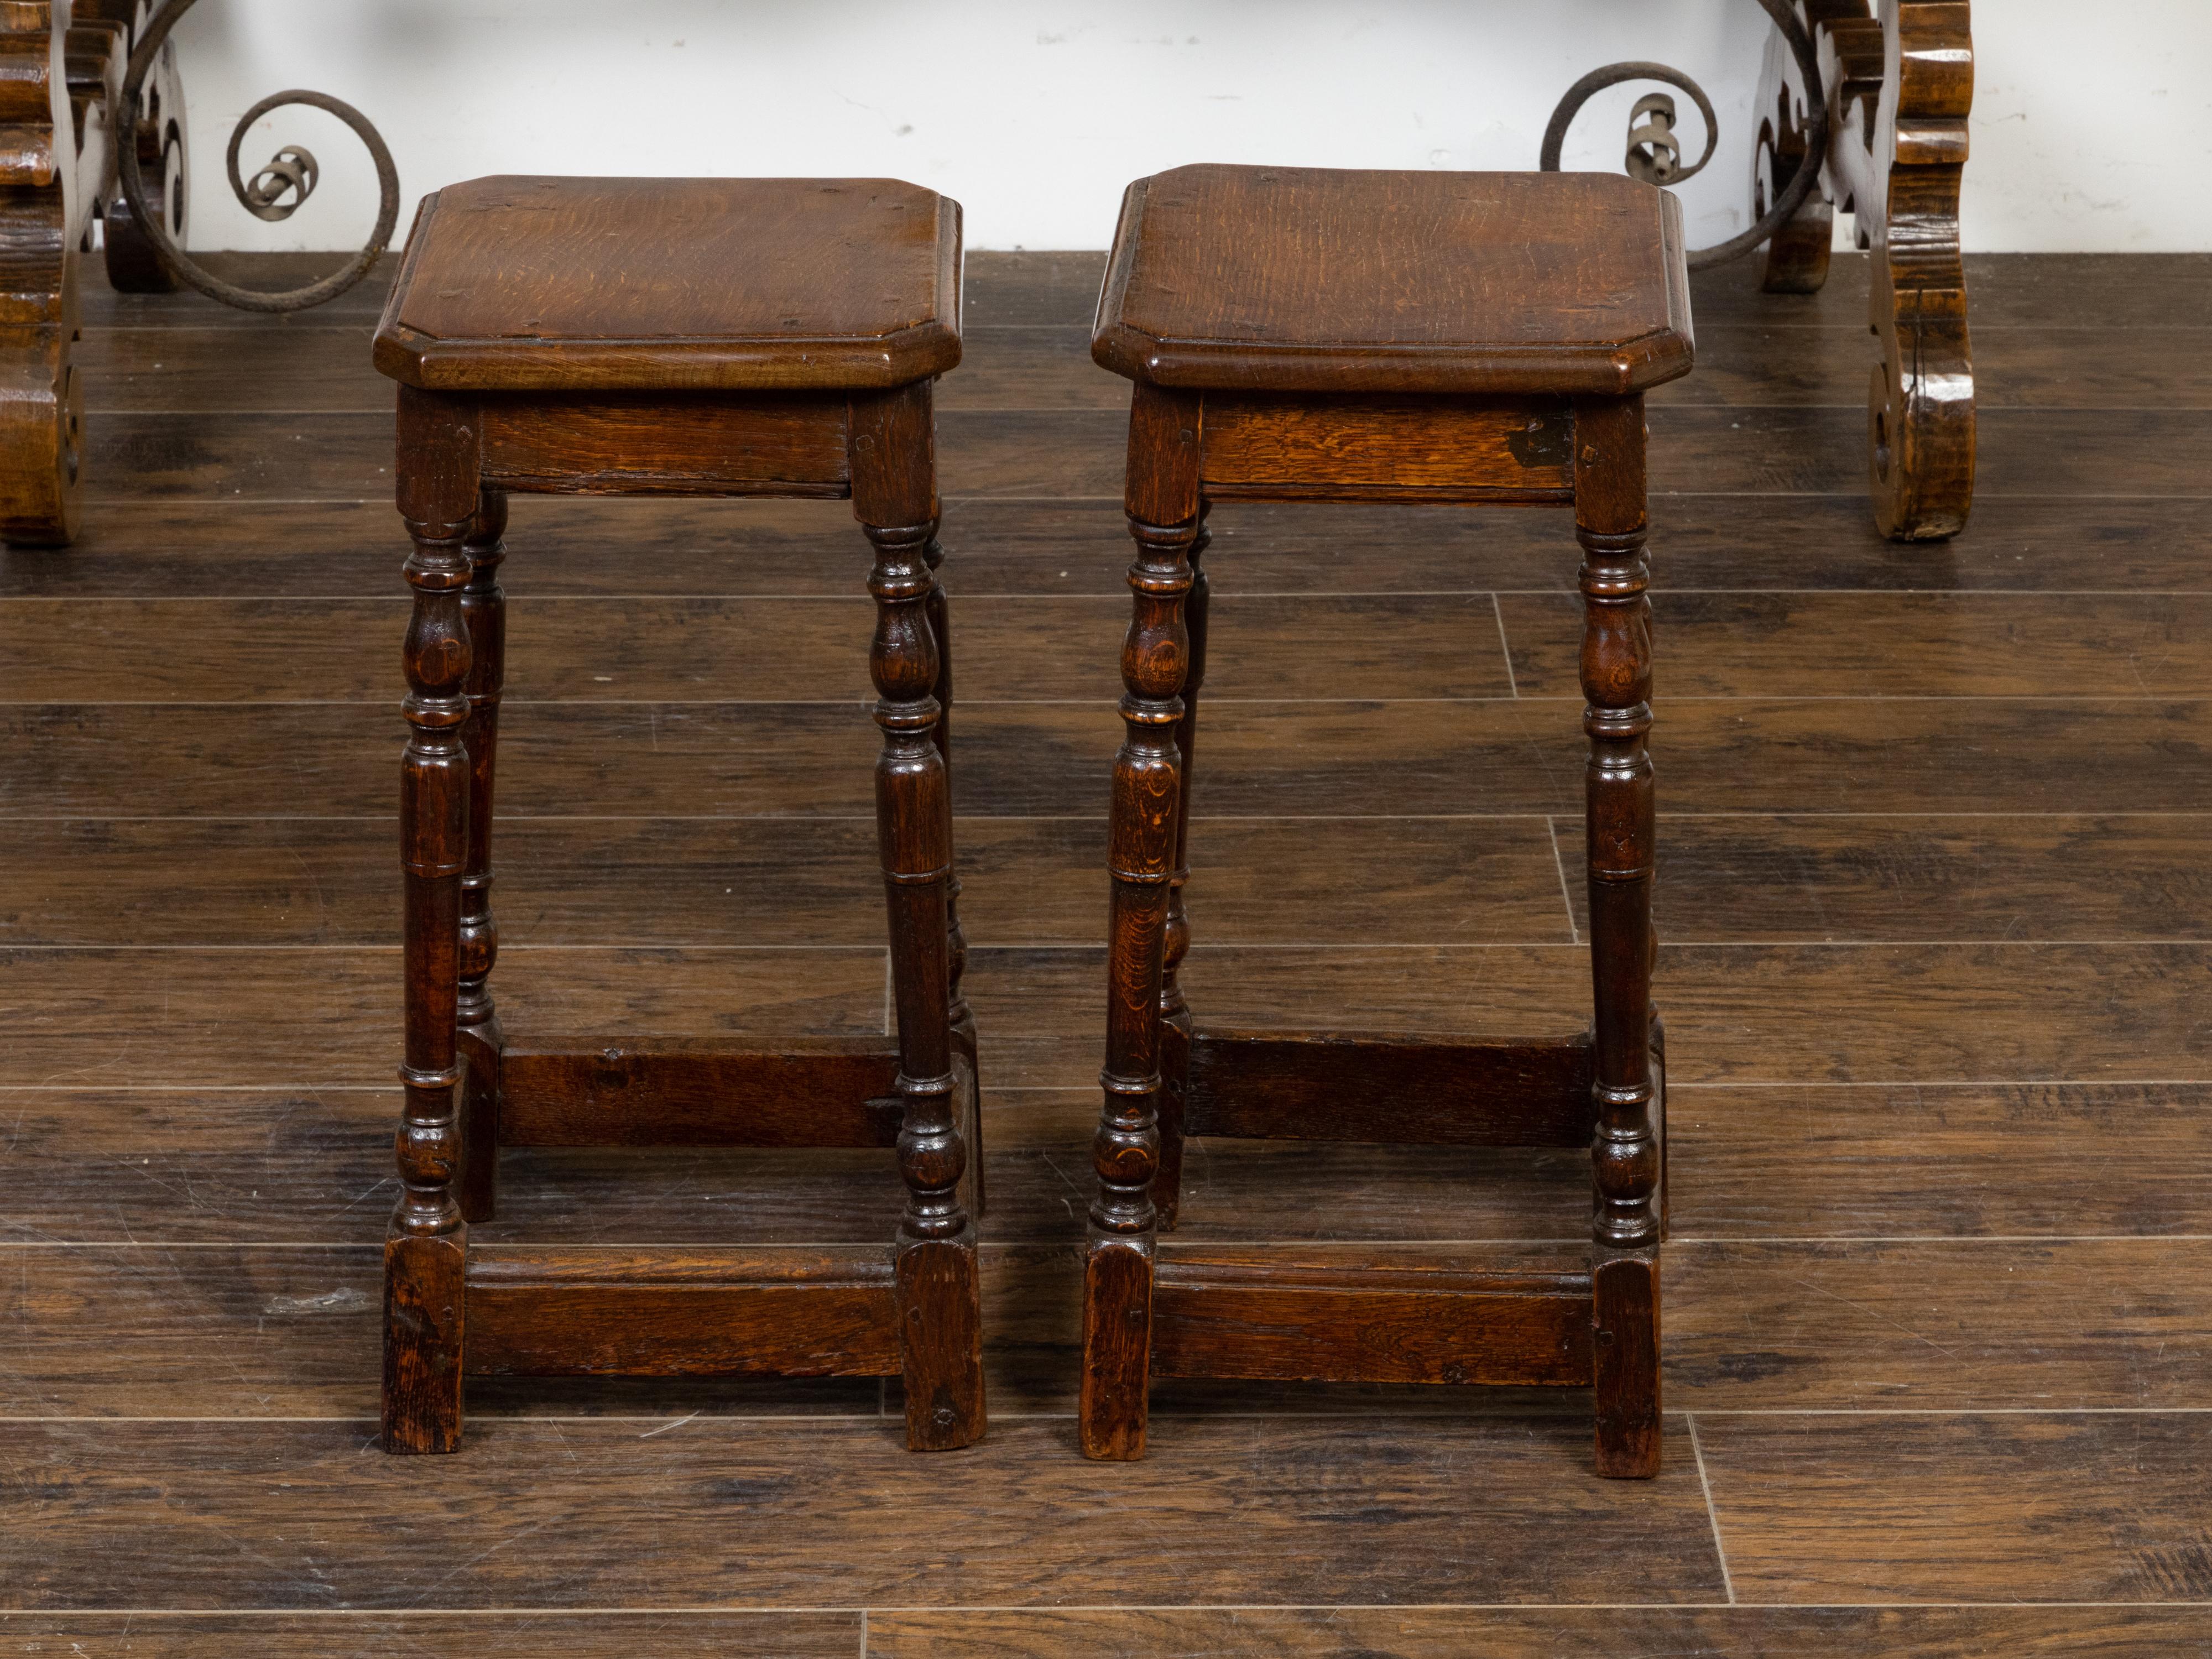 A pair of English oak joint stools from the 19th century, with square tops, turned legs and side stretchers. Created in England during the 19th century, each of this pair of joint stools features a square top with canted corners, sitting above a